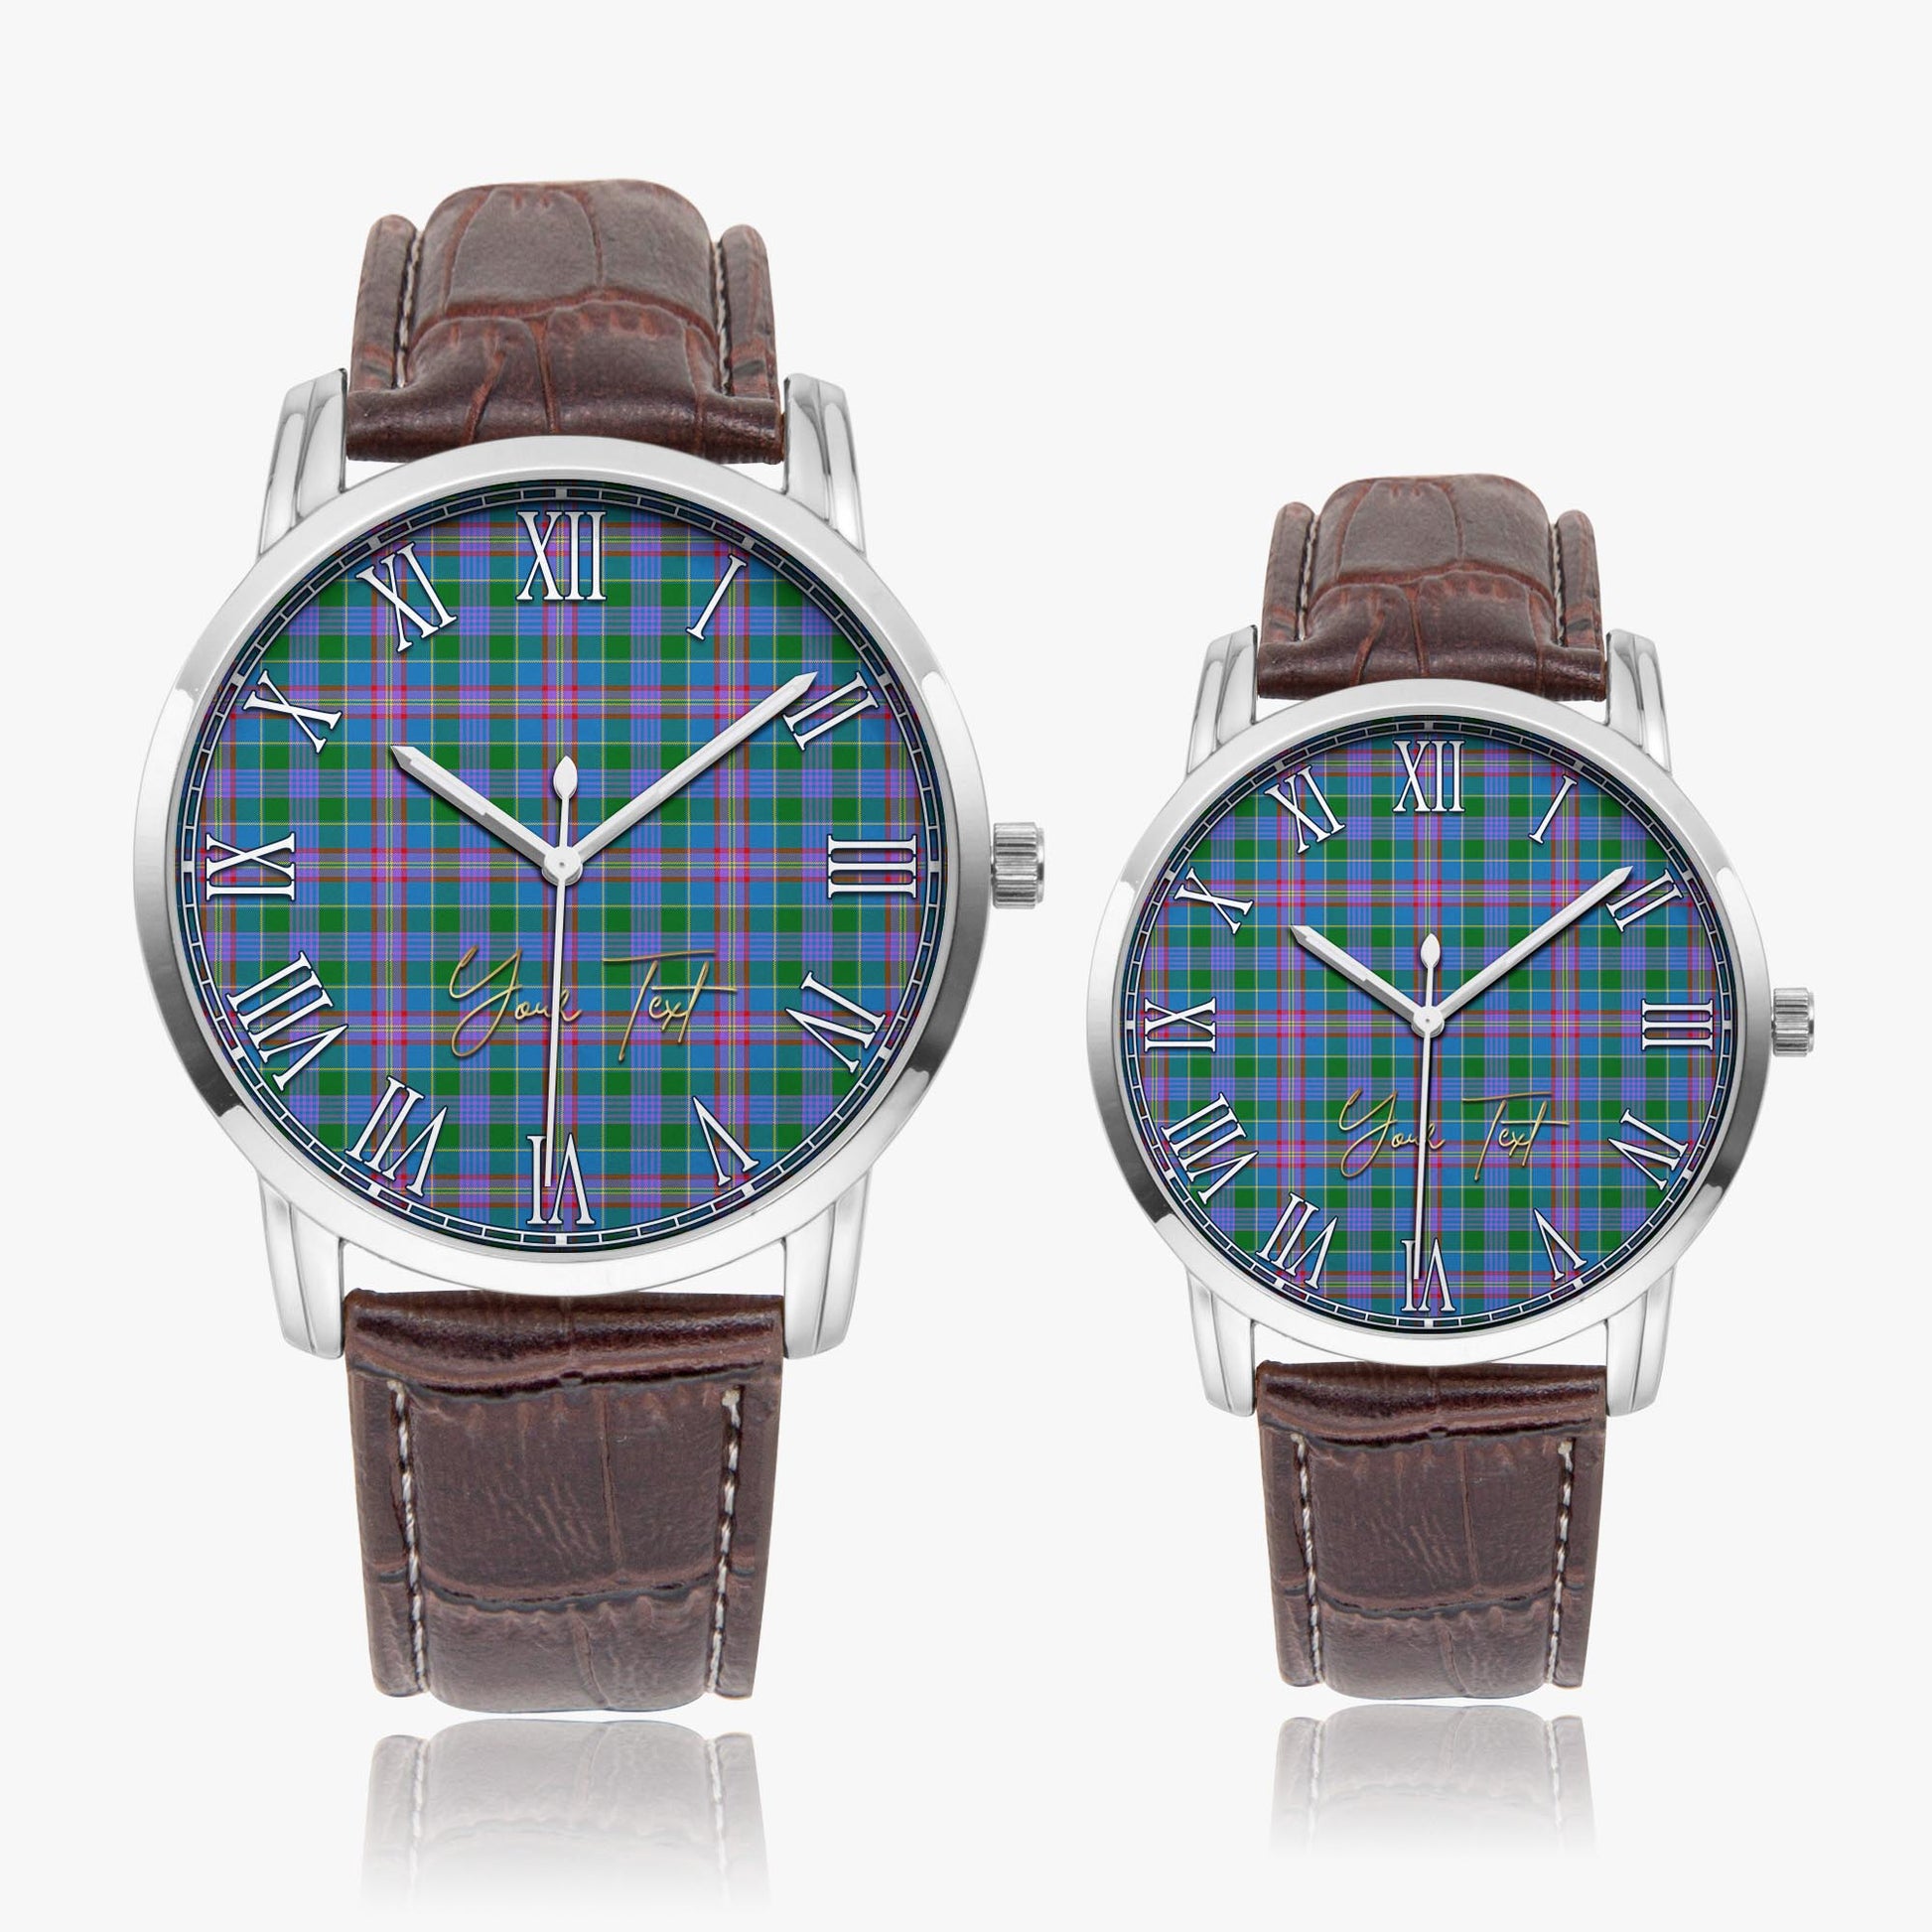 Ralston Tartan Personalized Your Text Leather Trap Quartz Watch Wide Type Silver Case With Brown Leather Strap - Tartanvibesclothing